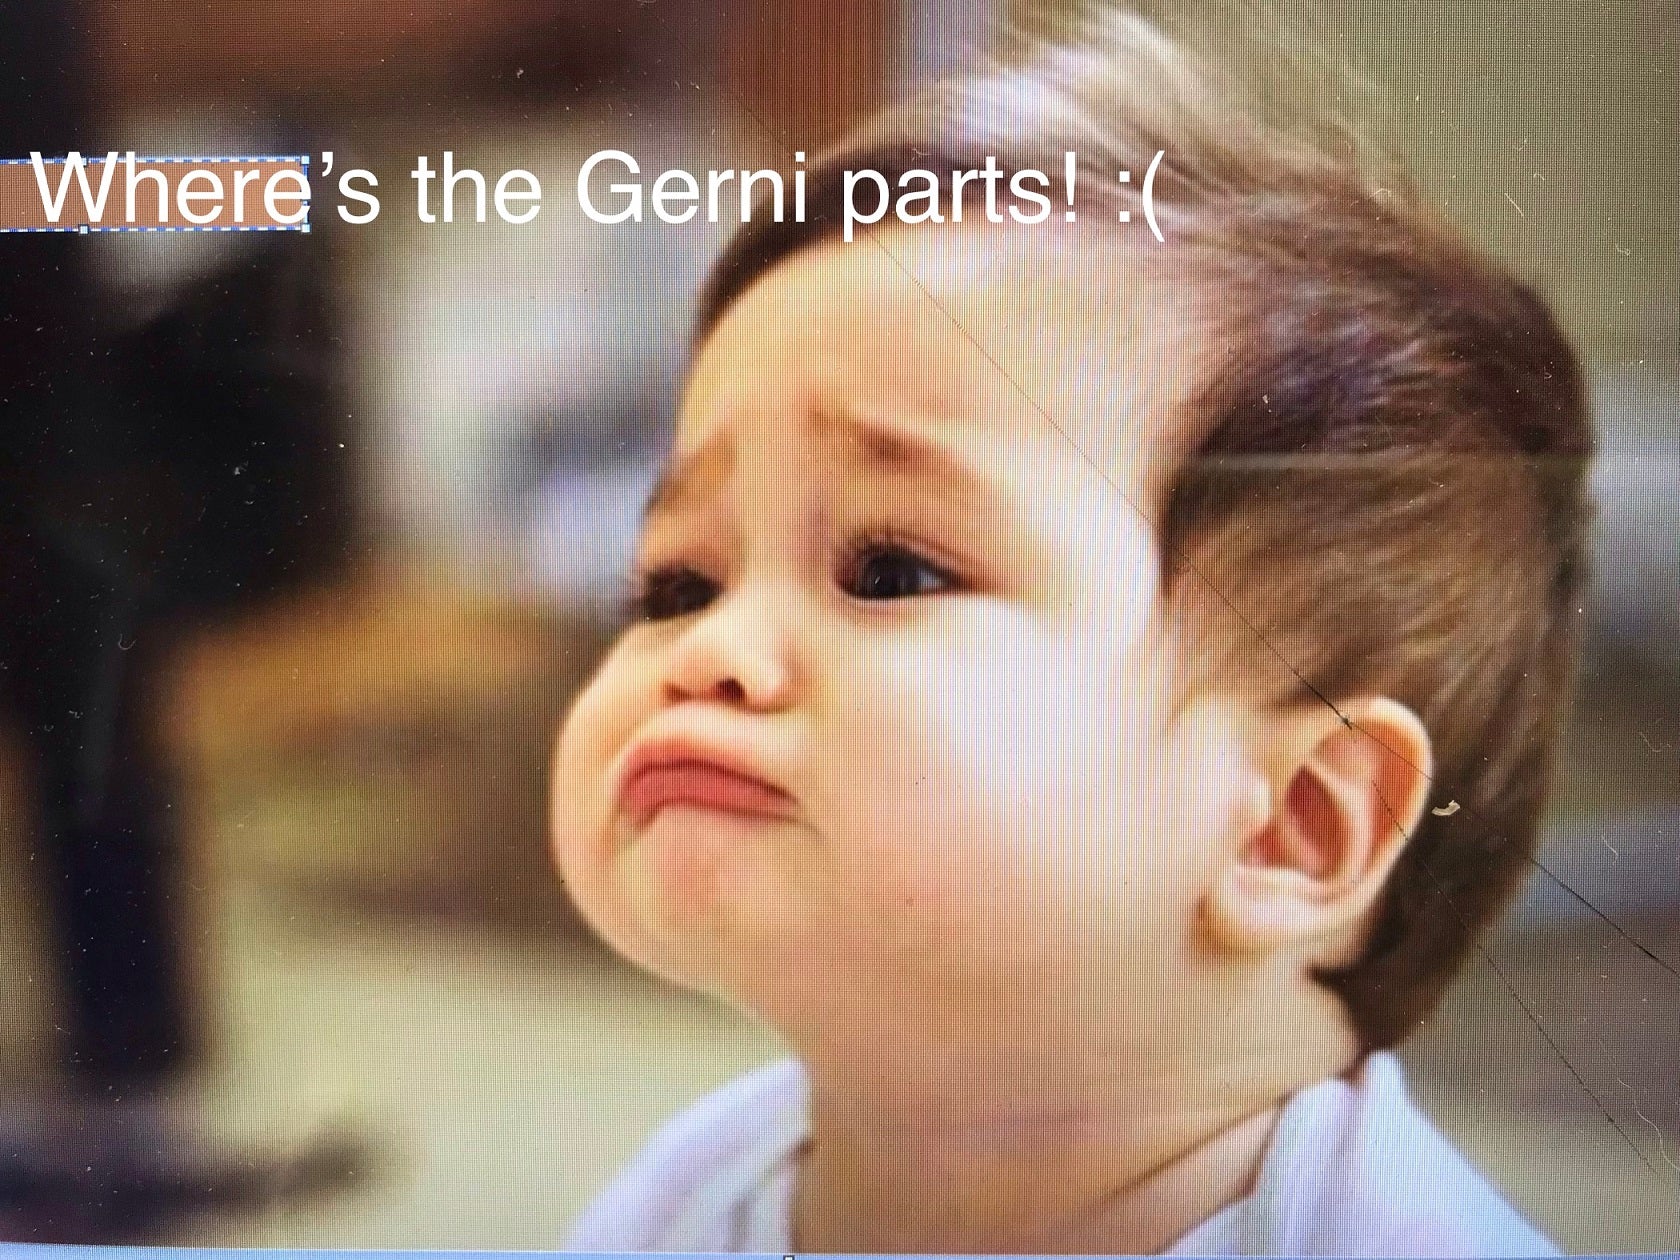 I'm Gerni Mad! Unable To Get Parts!